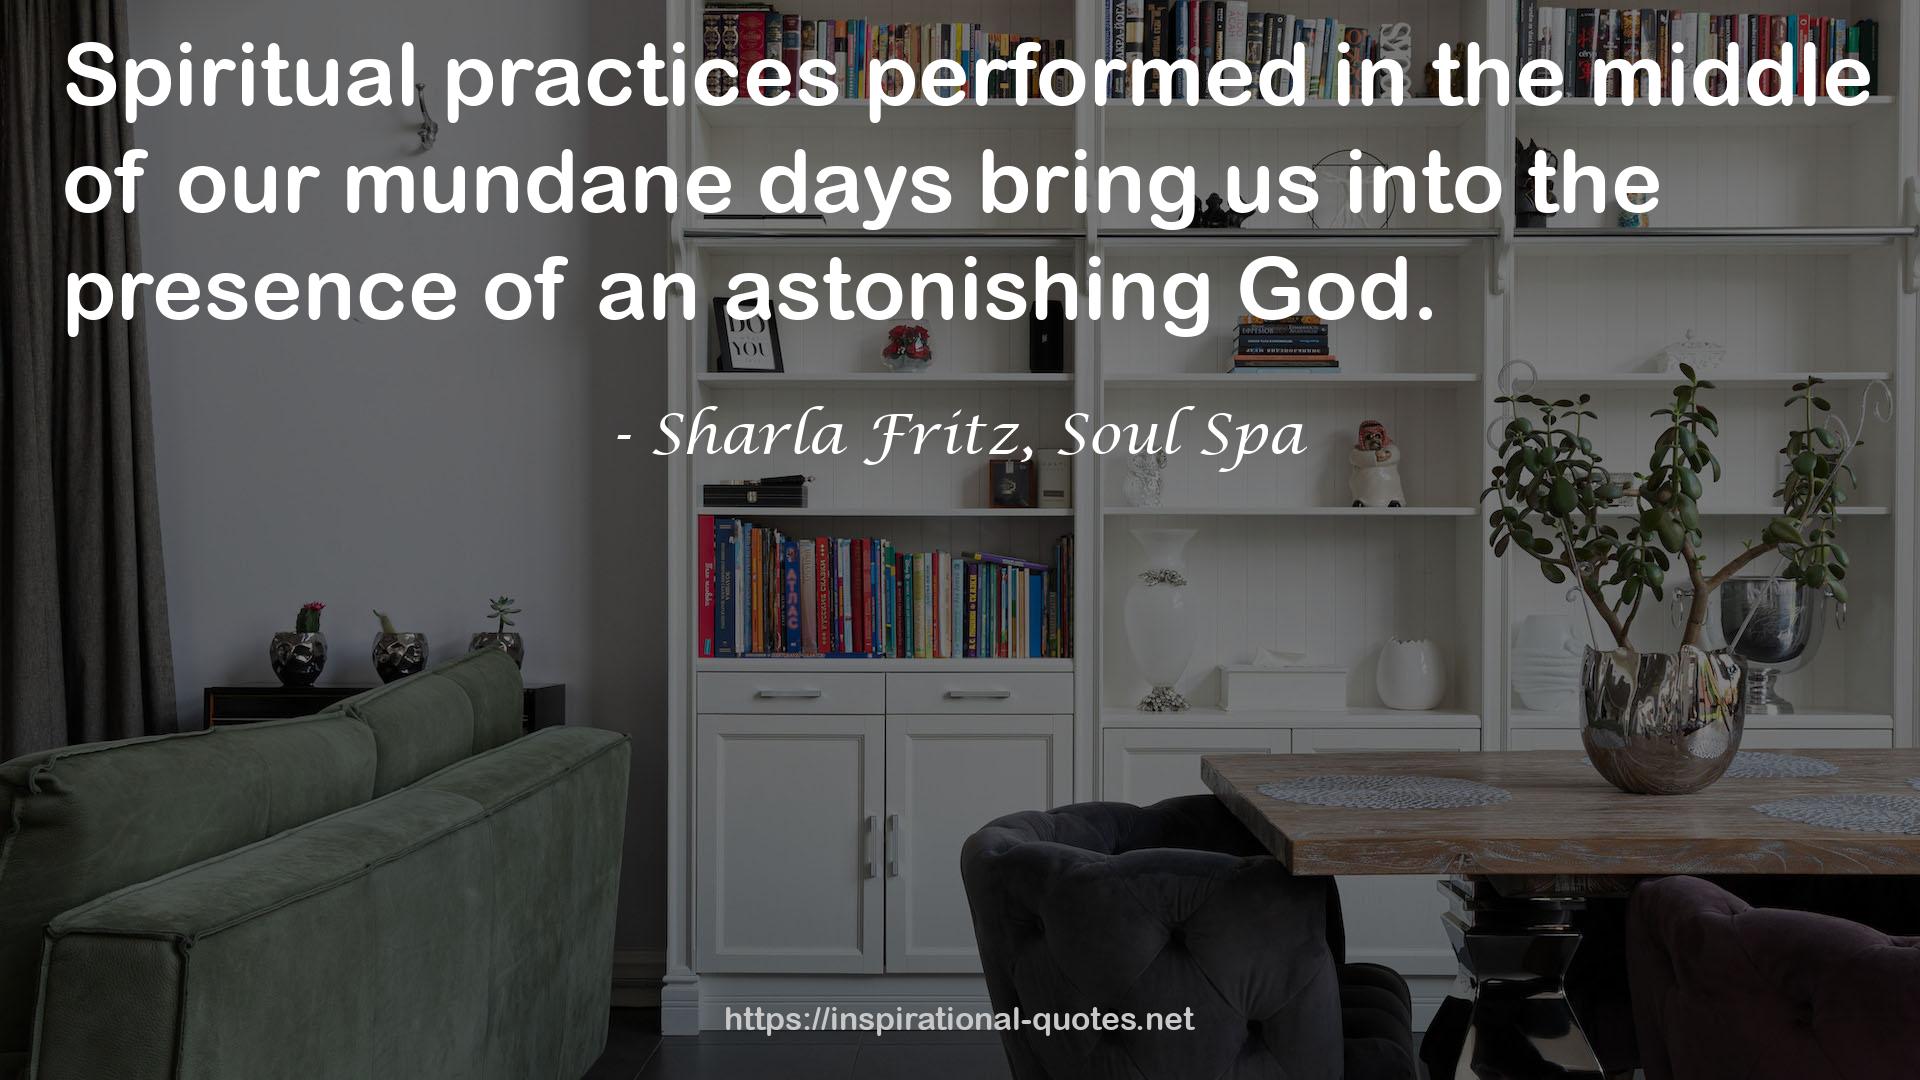 Sharla Fritz, Soul Spa QUOTES